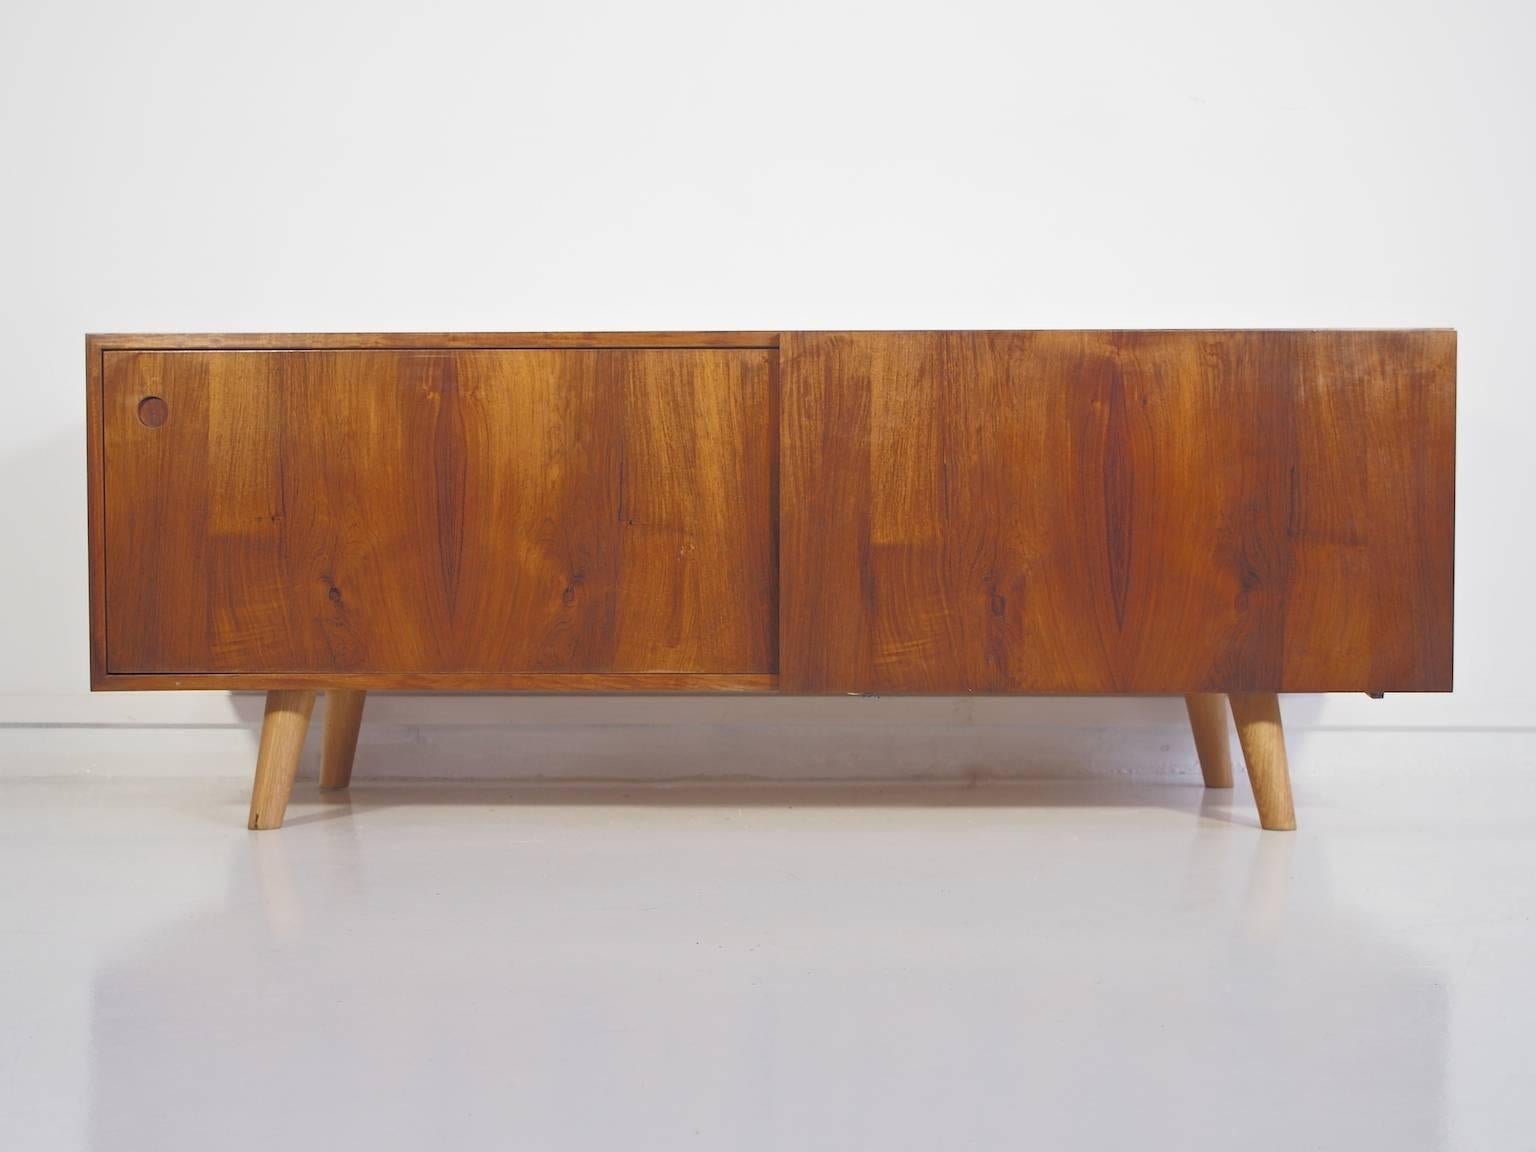 Ib Kofod-Larsen low sideboard made of hardwood, produced by Faarup Møbelfabrik in Denmark. Front with two sliding doors enclosing shelves in oak, cable outlet at the rear edge. Later fitted with round angled tapered legs made of solid oak.